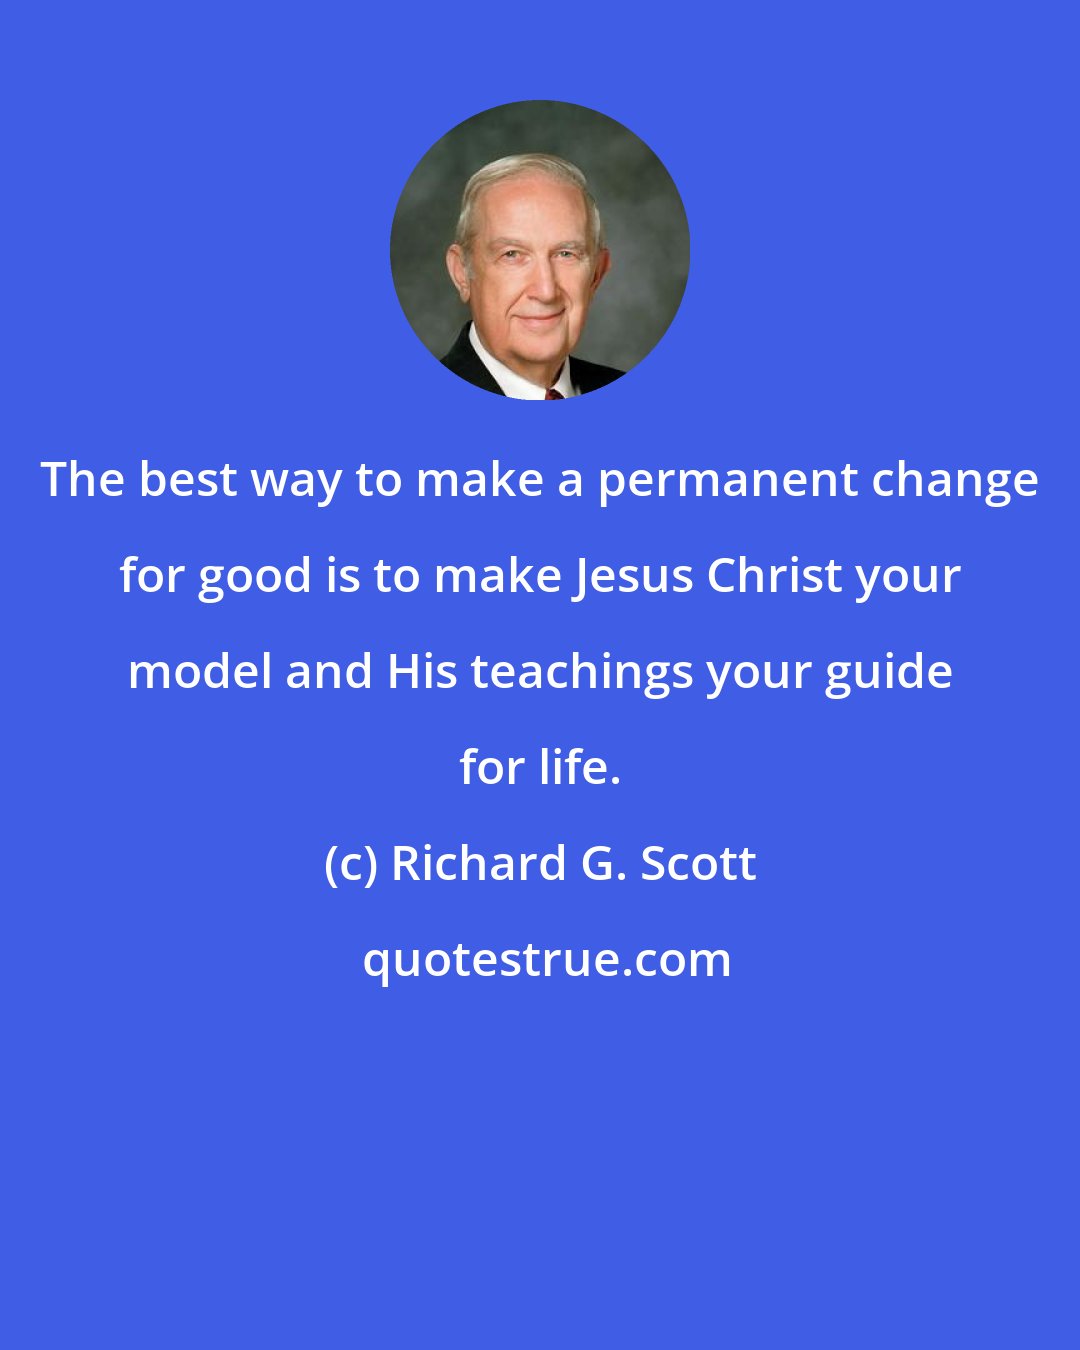 Richard G. Scott: The best way to make a permanent change for good is to make Jesus Christ your model and His teachings your guide for life.